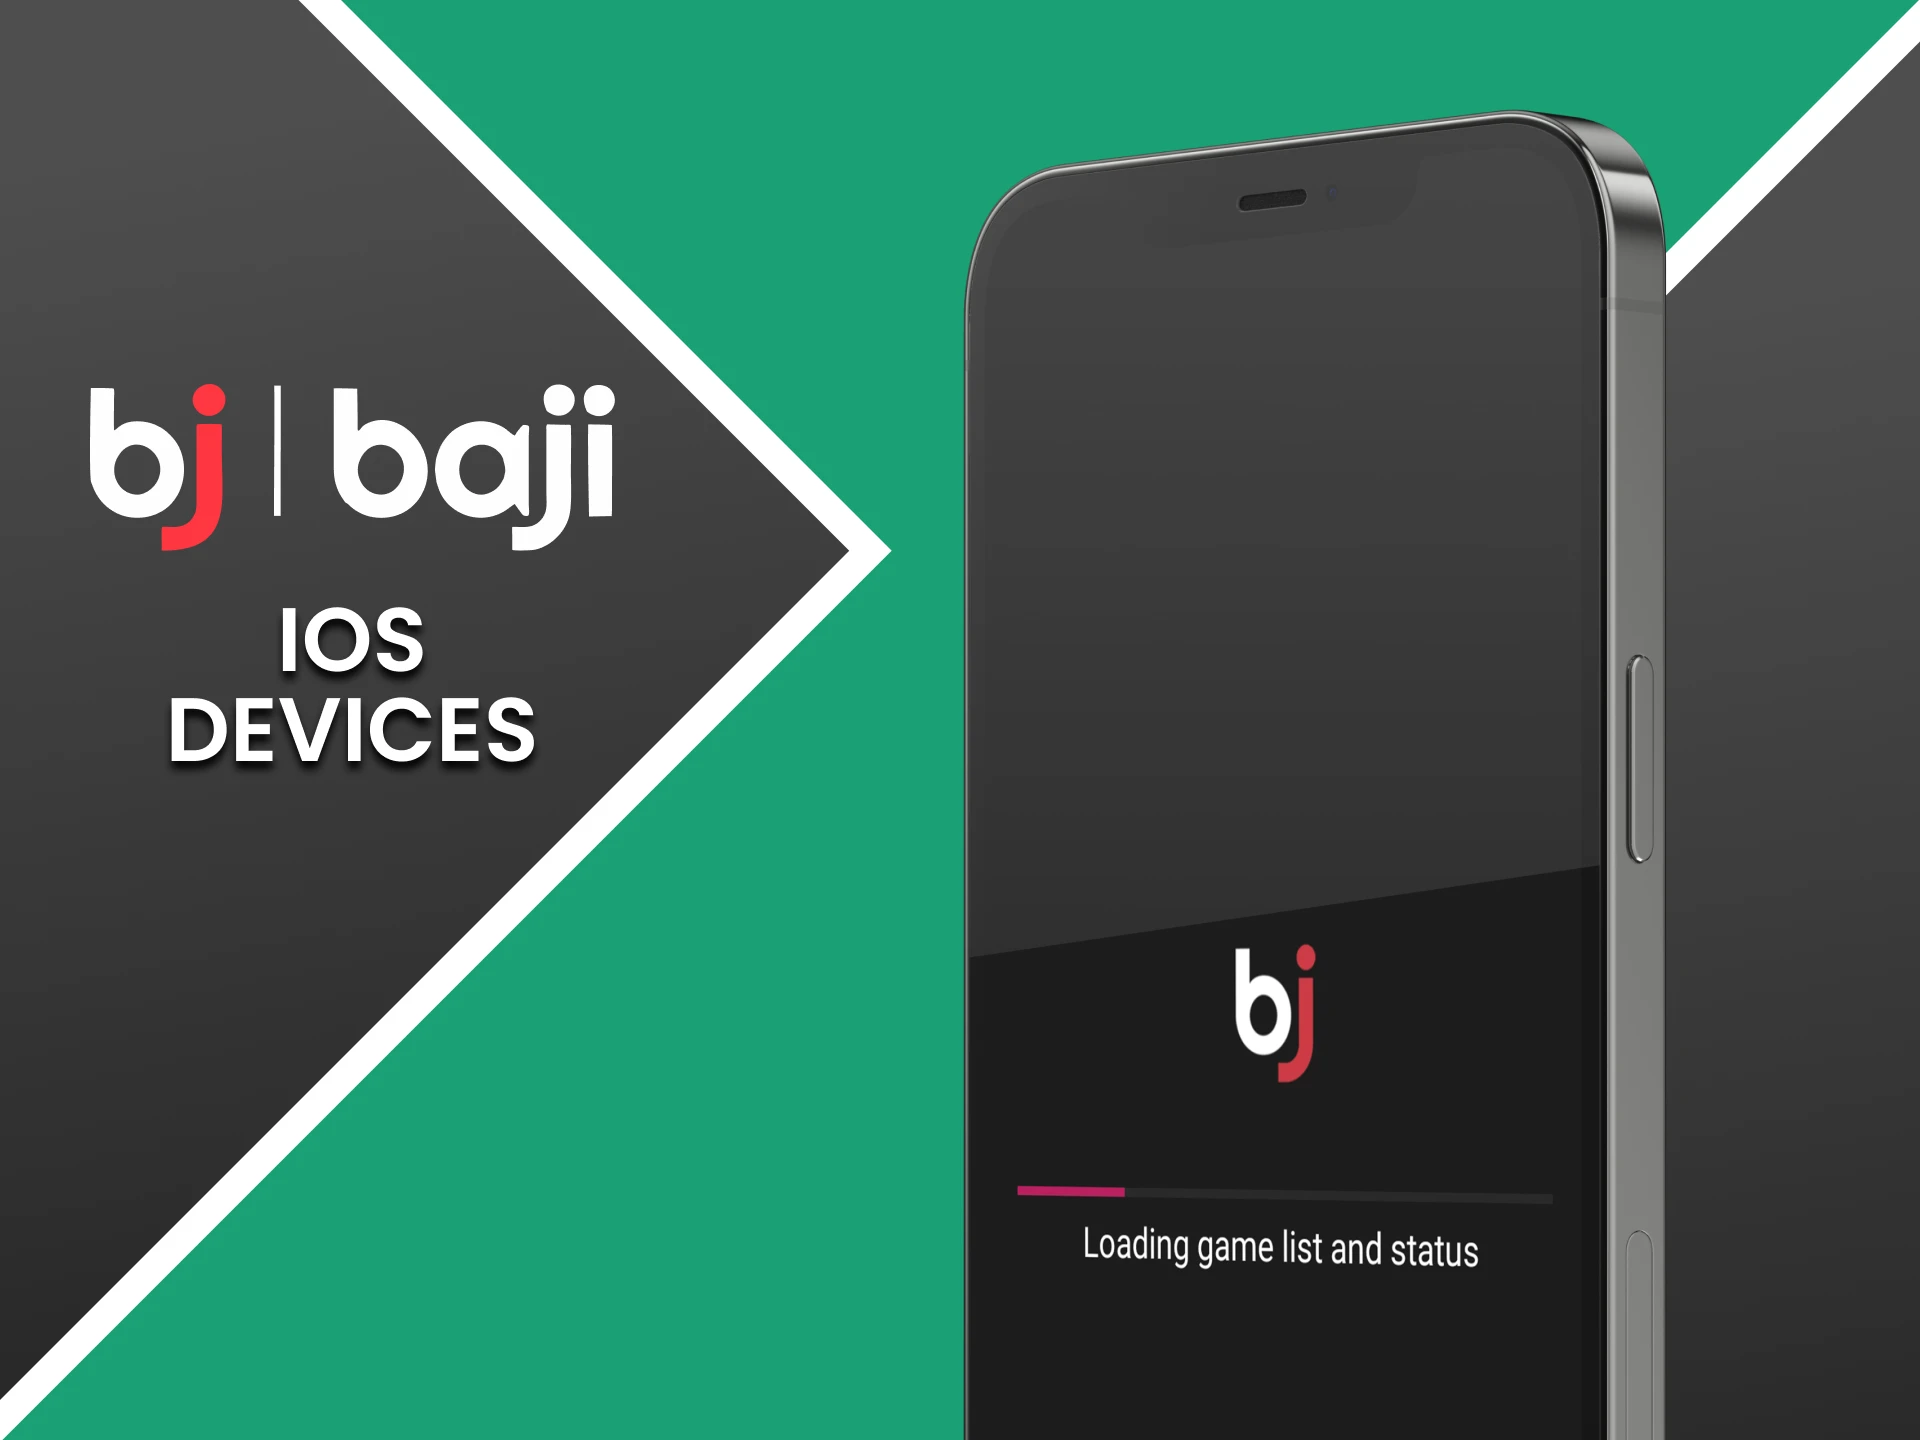 Download the Baji app for iOS.